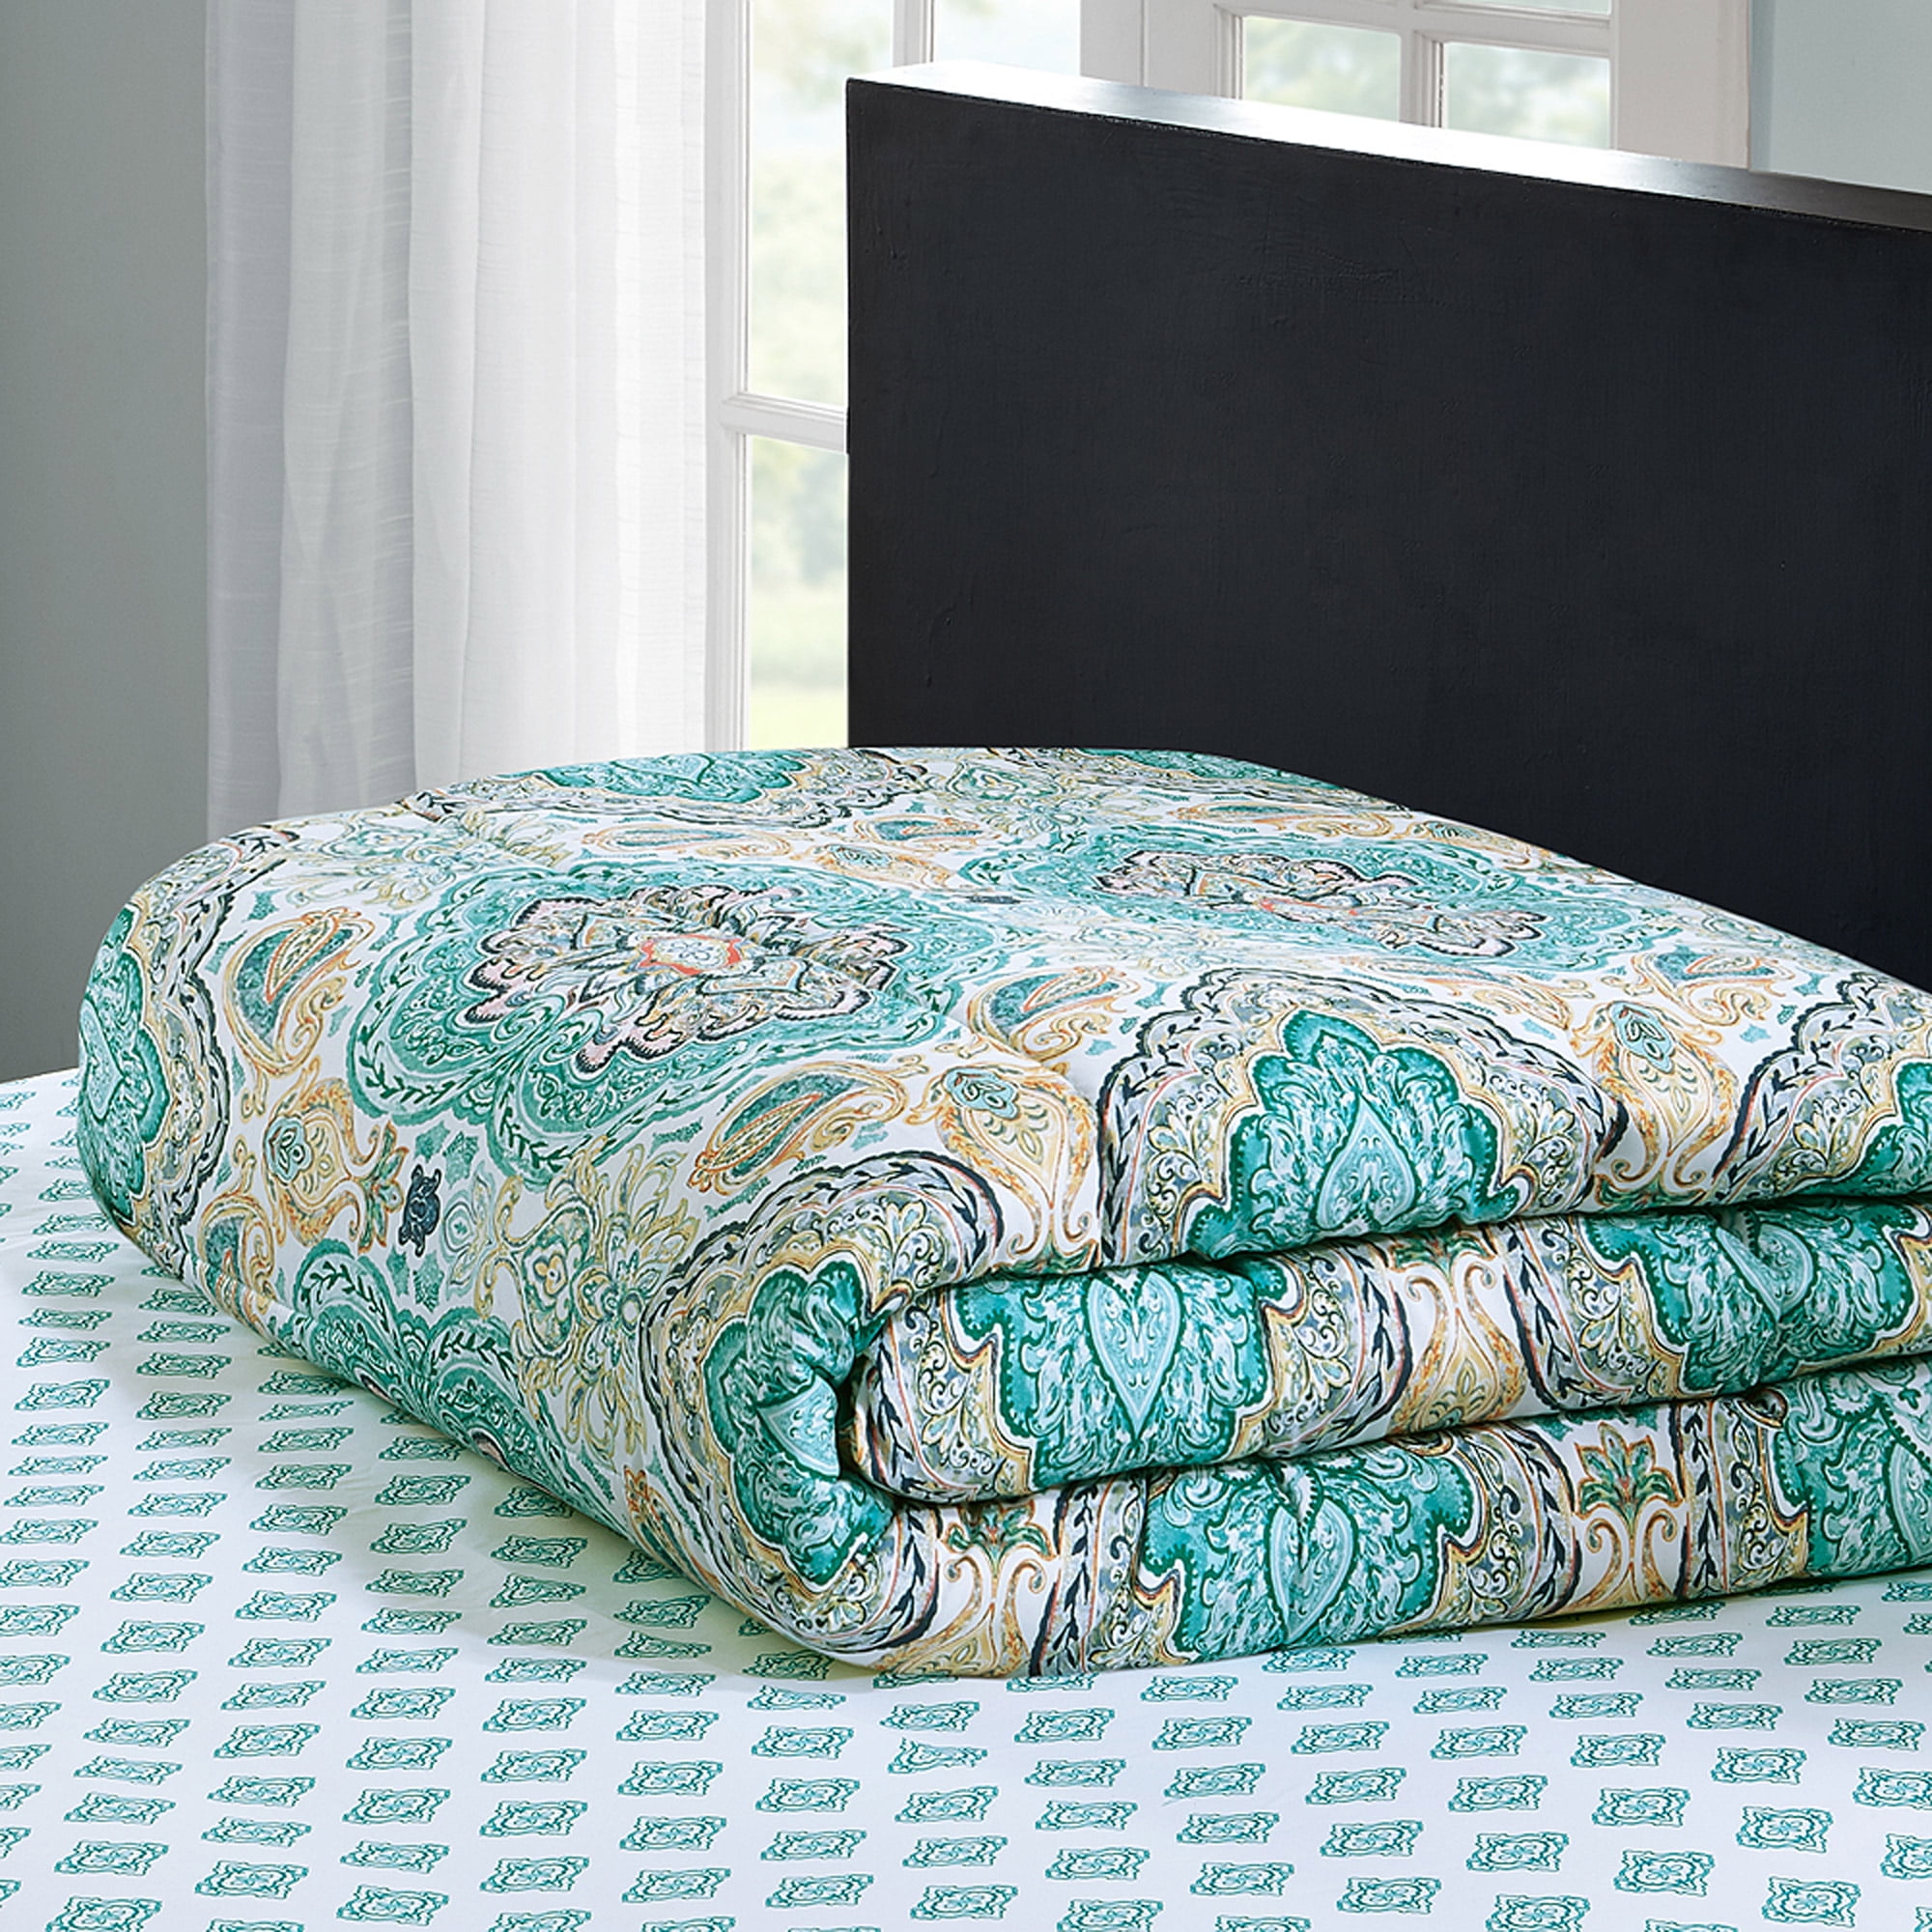 Mainstays Monique Paisley Bed In A Bag Comforter Set Twin Twin Xl